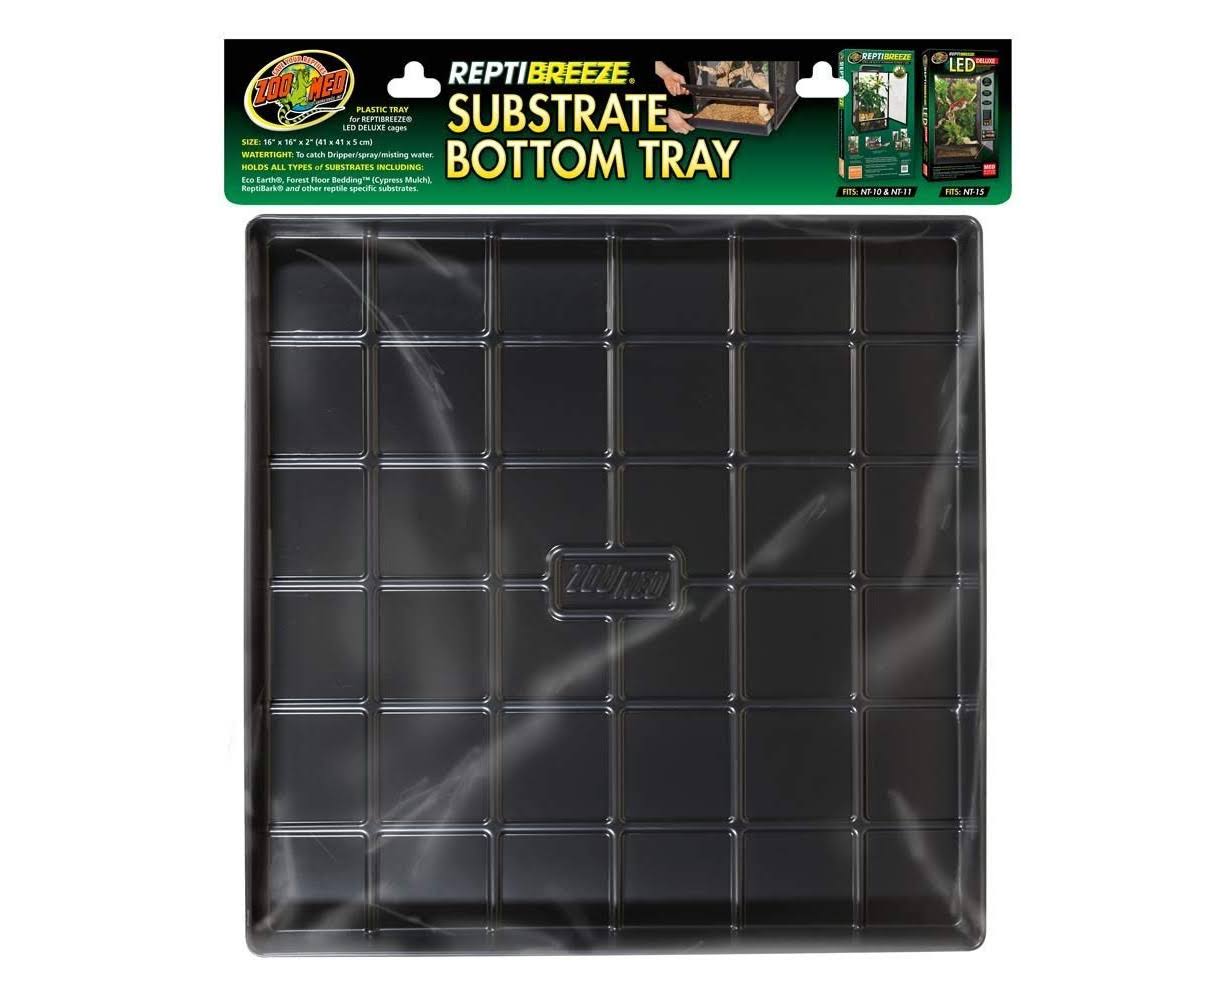 Zoo Med Reptibreeze Substrate Bottom Tray - Black